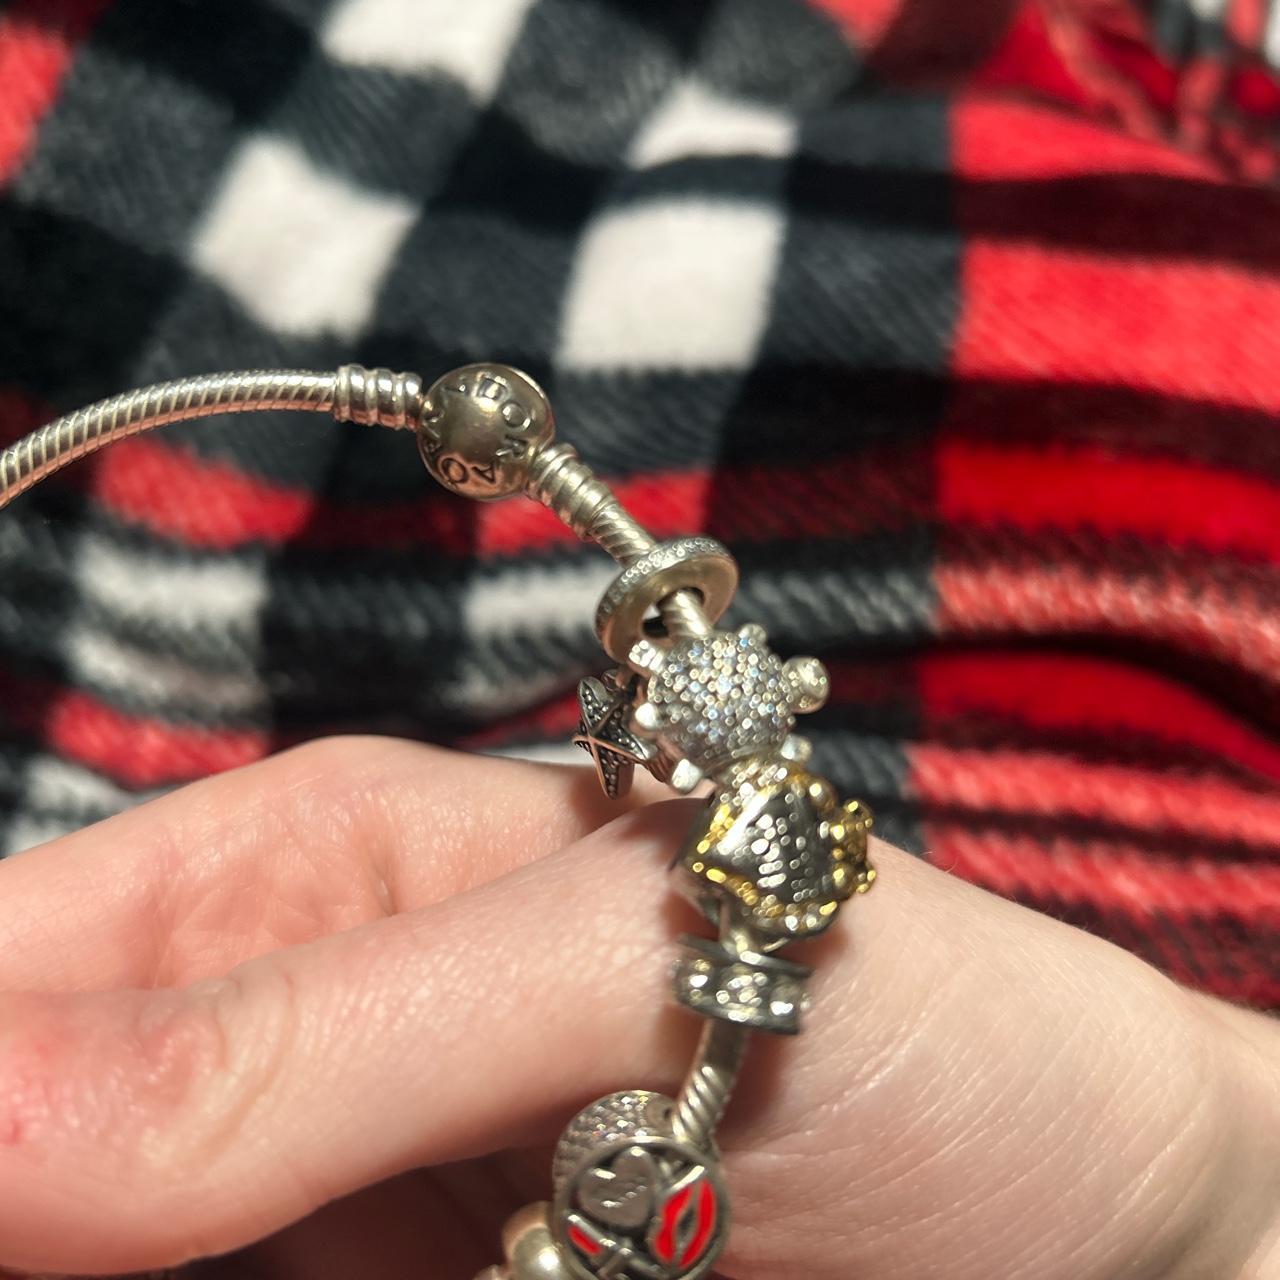 Uno de 50 charm bracelet. Acquired from a private - Depop